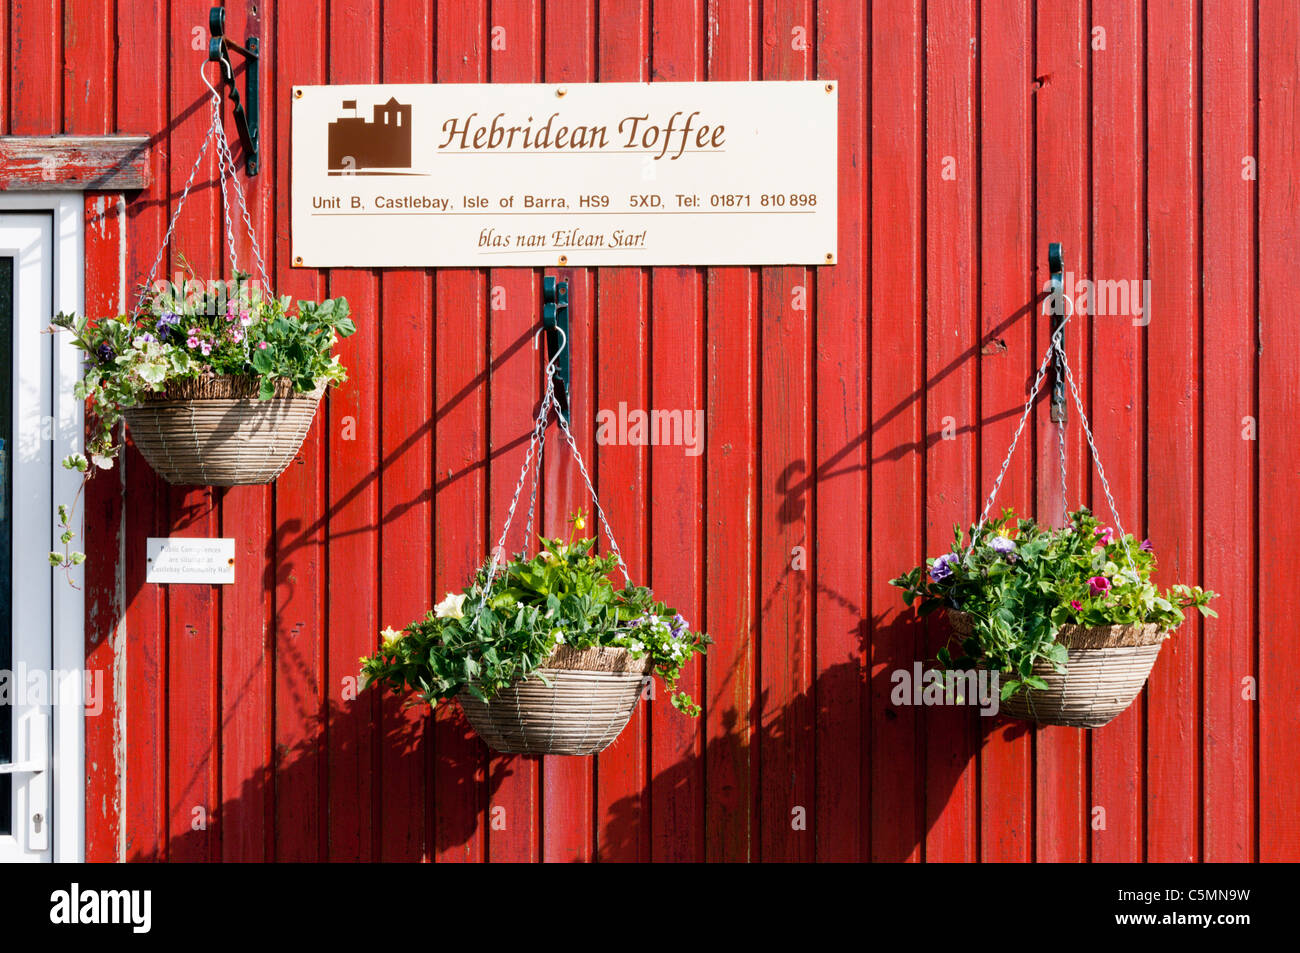 Hanging baskets outside the Hebridean Toffee Shop in Castlebay on the Isle of Barra in the Outer Hebrides Stock Photo